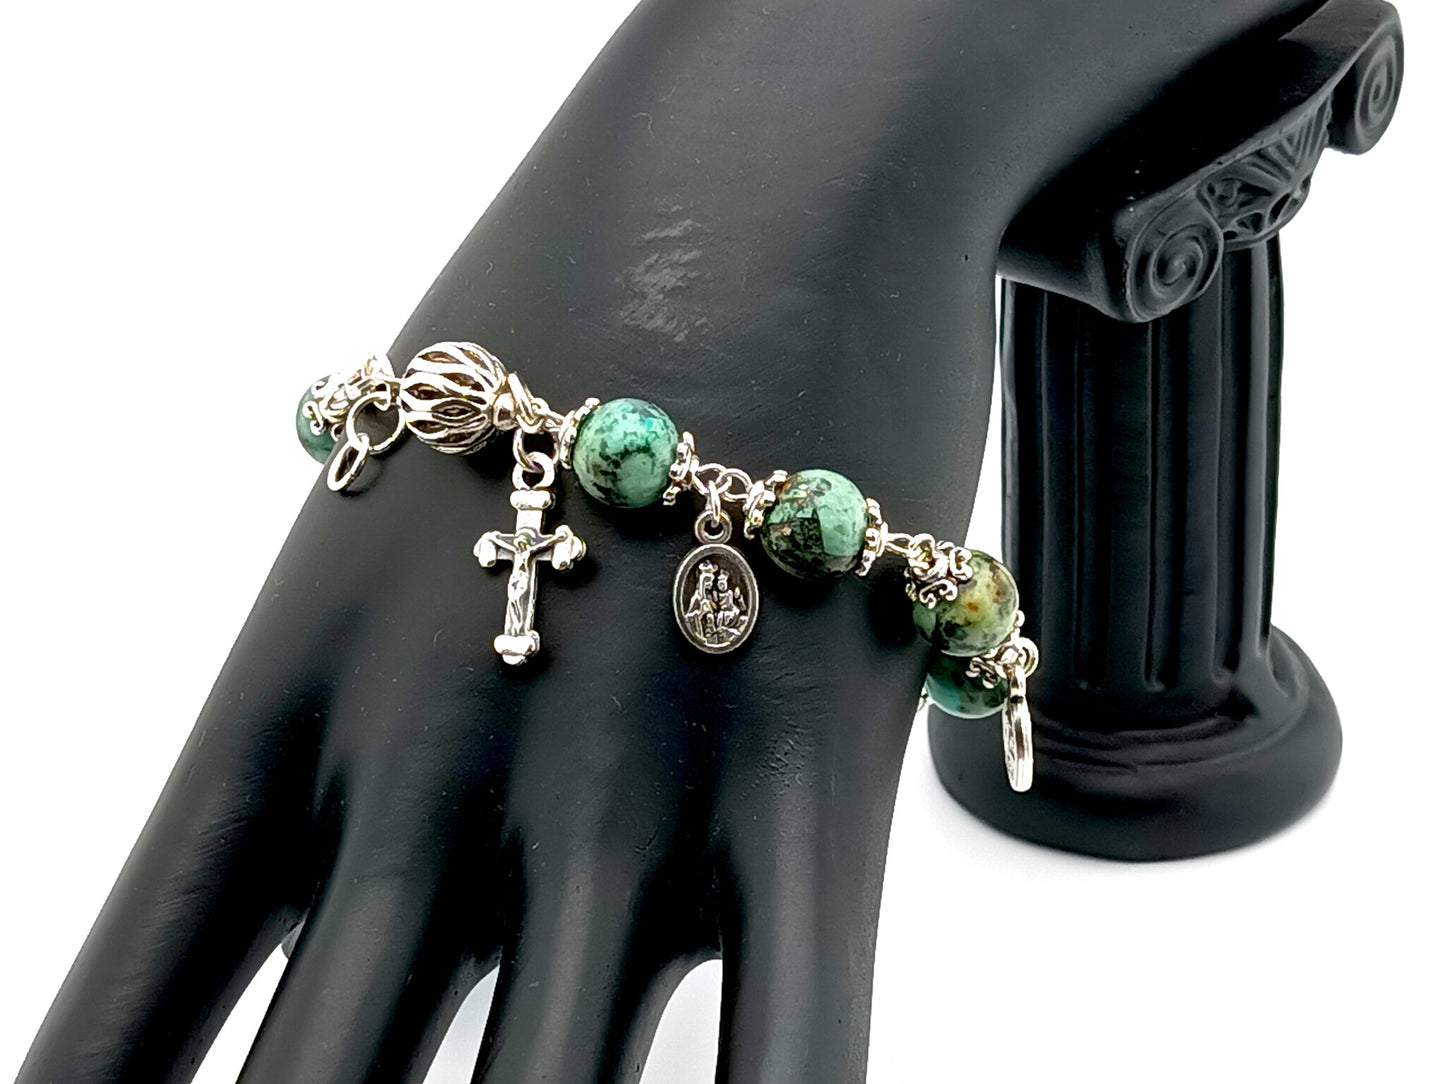 Our Lady of Mount Carmel unique rosary beads with jade and silver lattice beads, small silver double sided crucifix and medal.